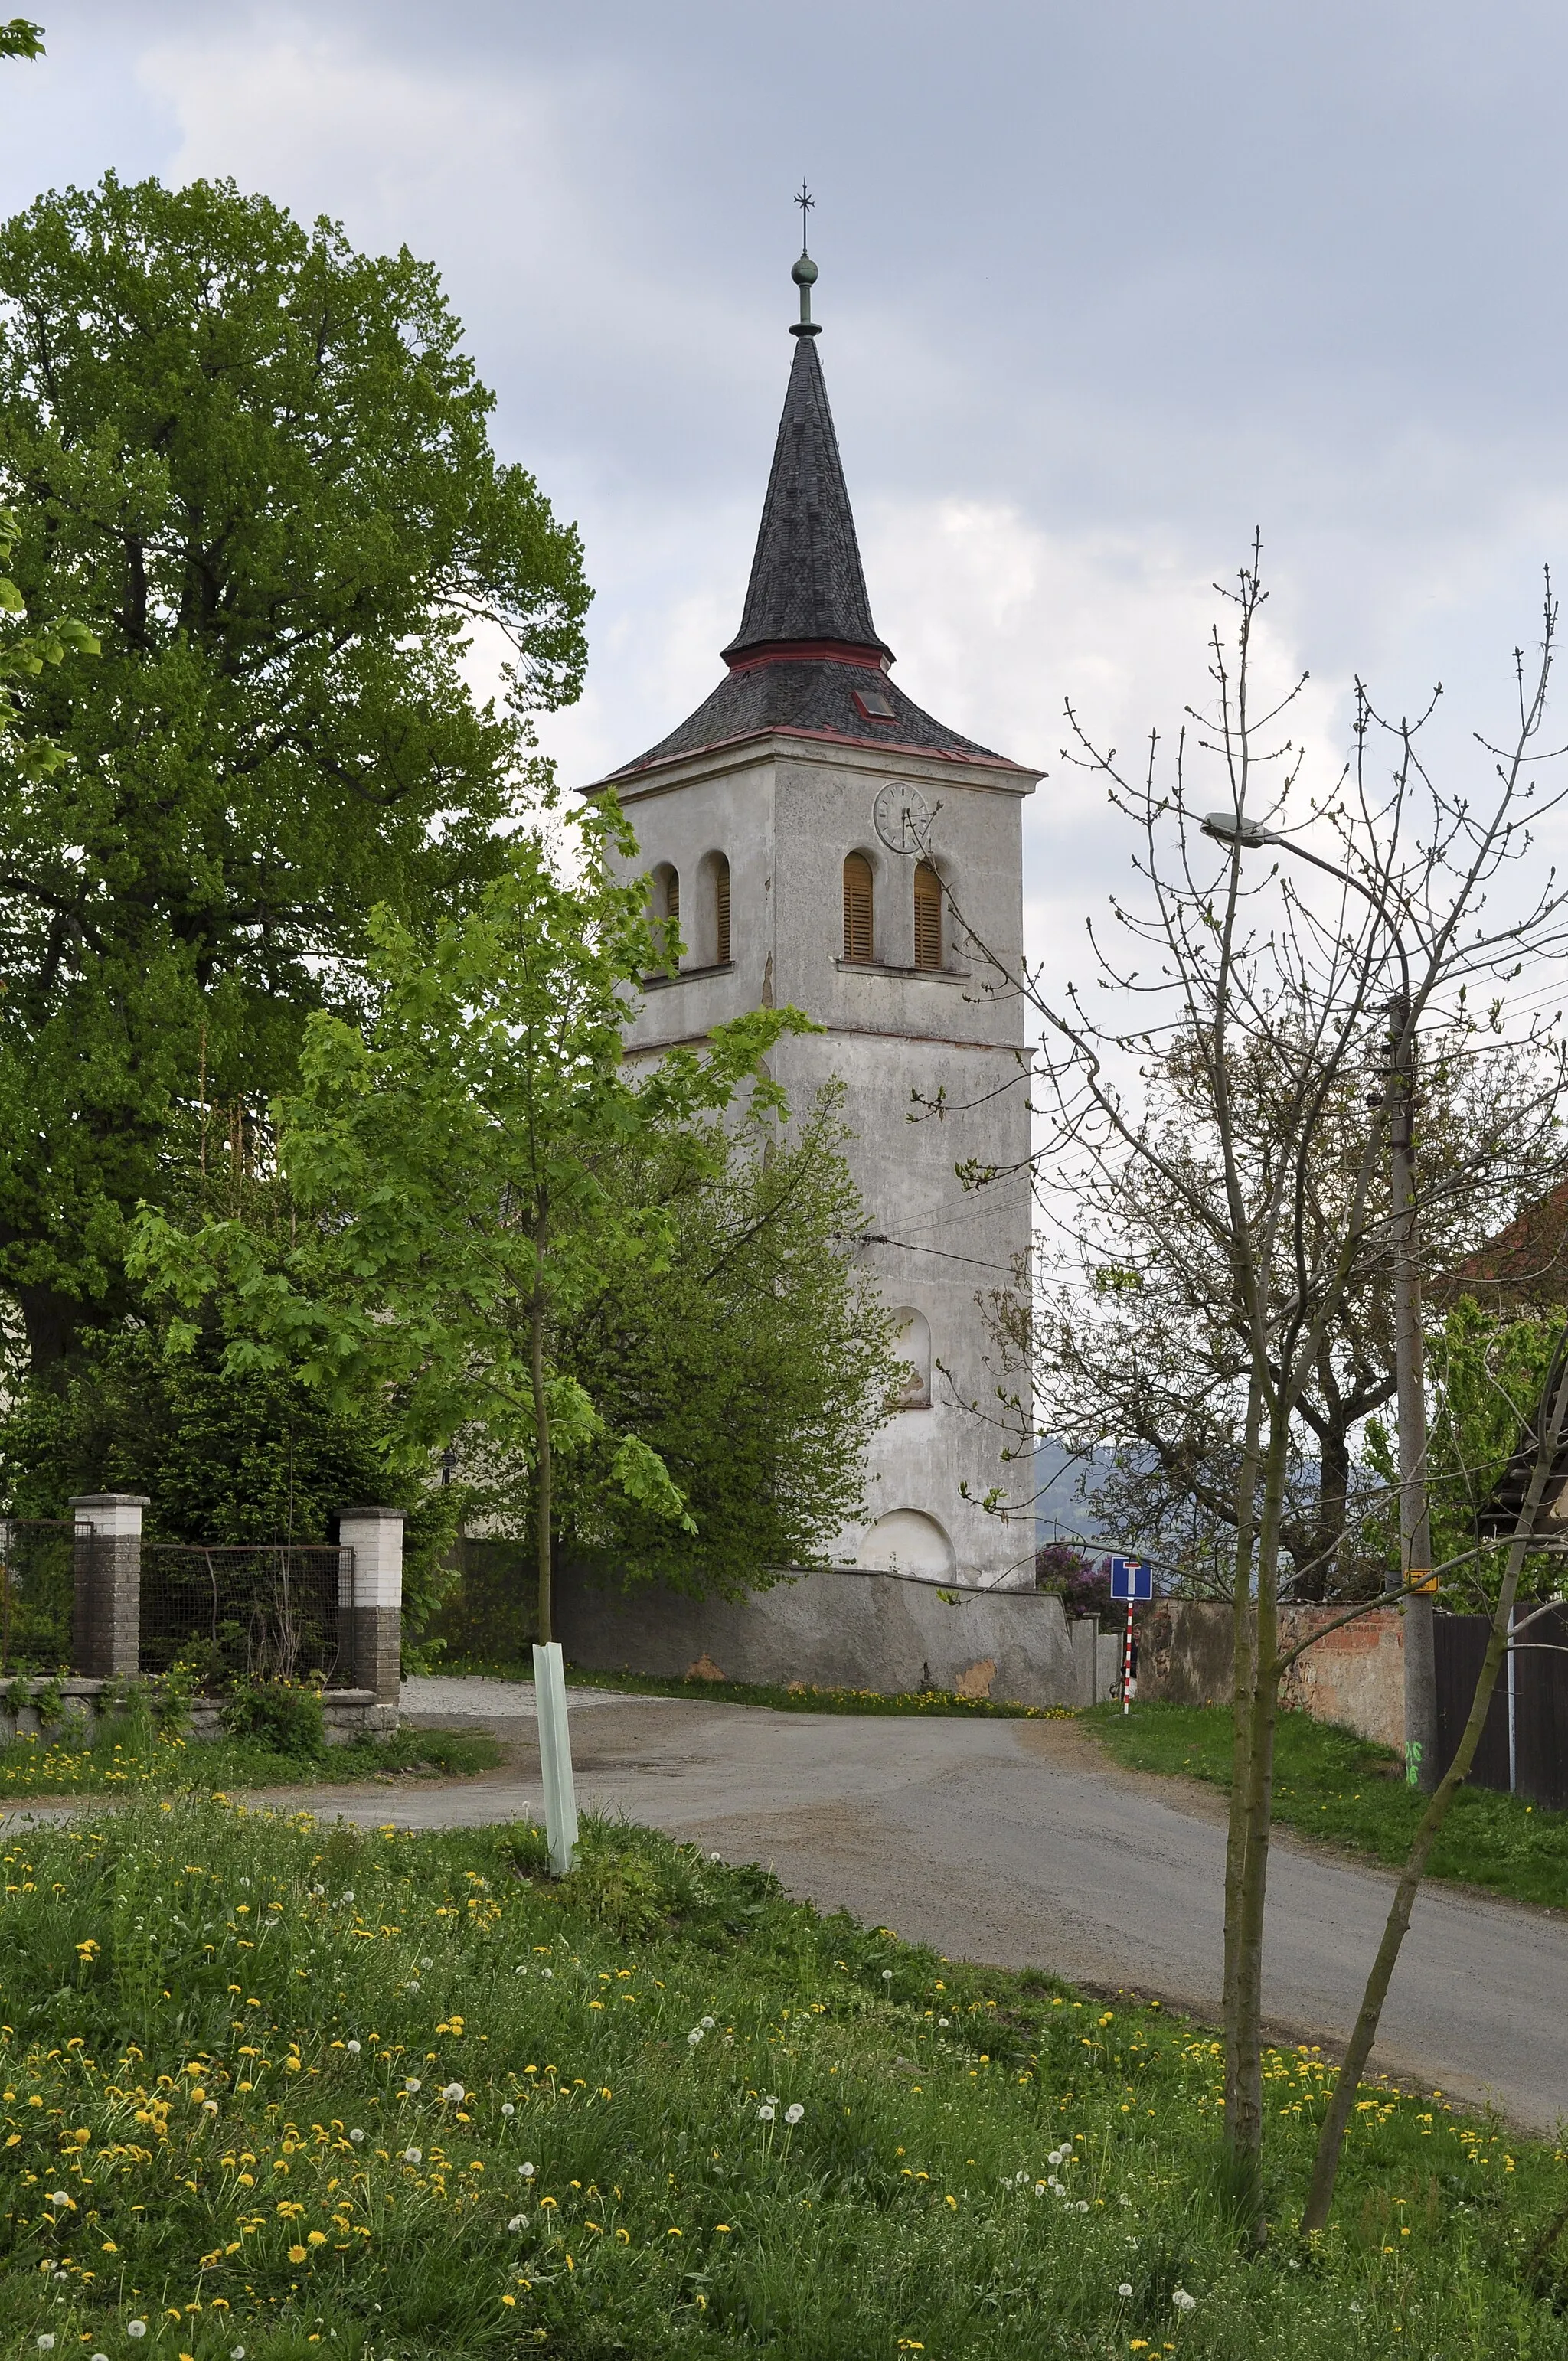 Photo showing: Tower of the church